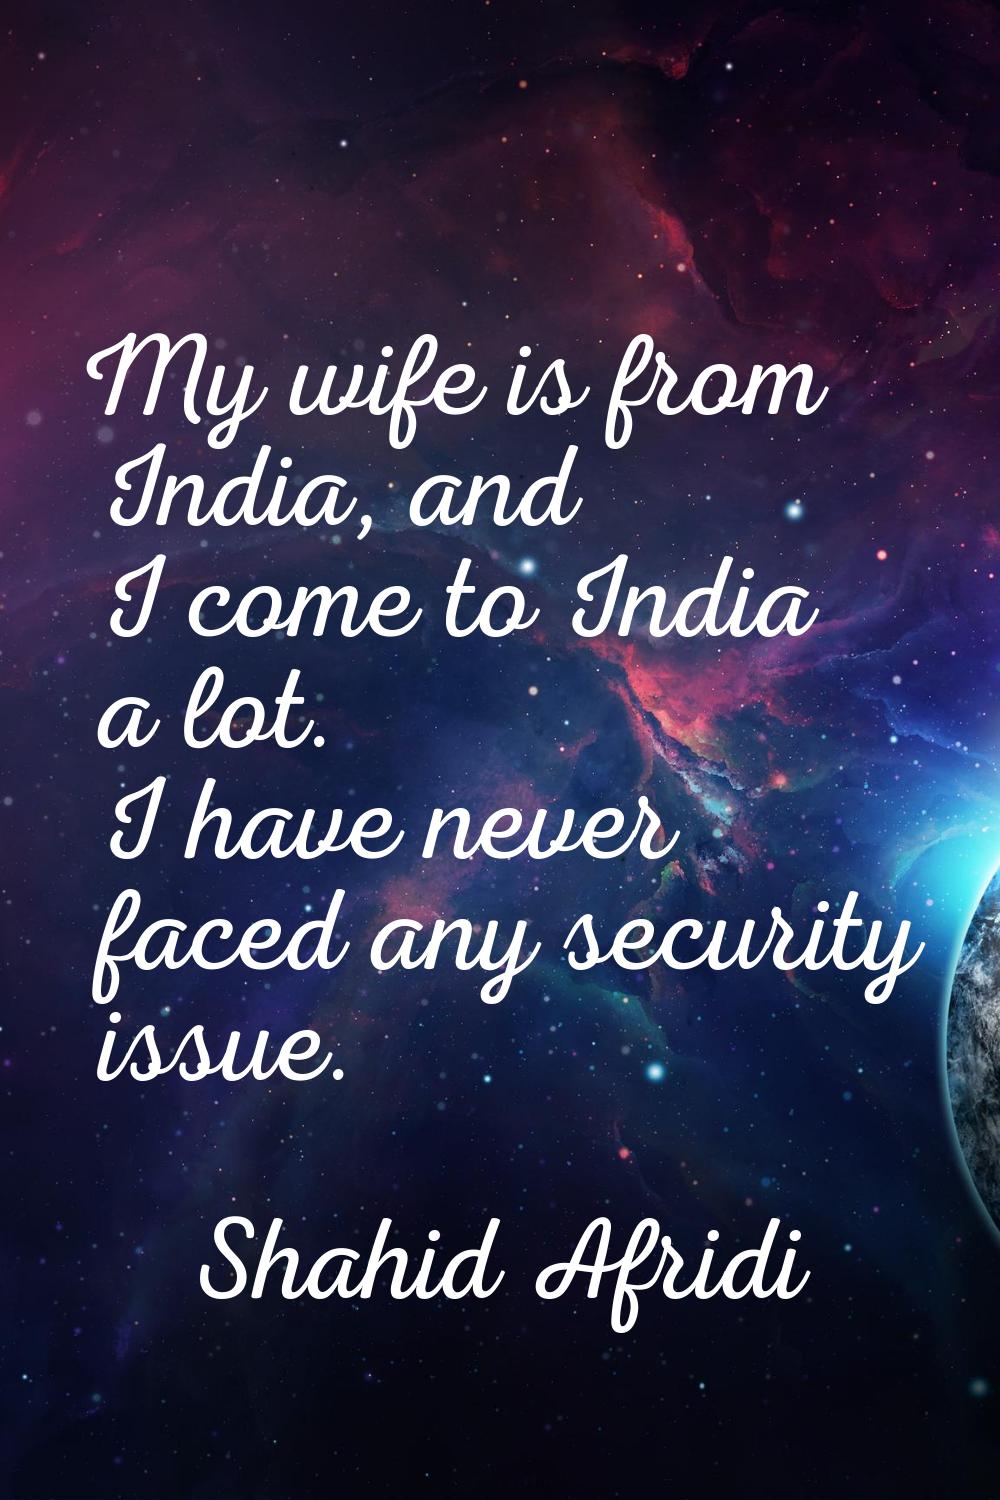 My wife is from India, and I come to India a lot. I have never faced any security issue.